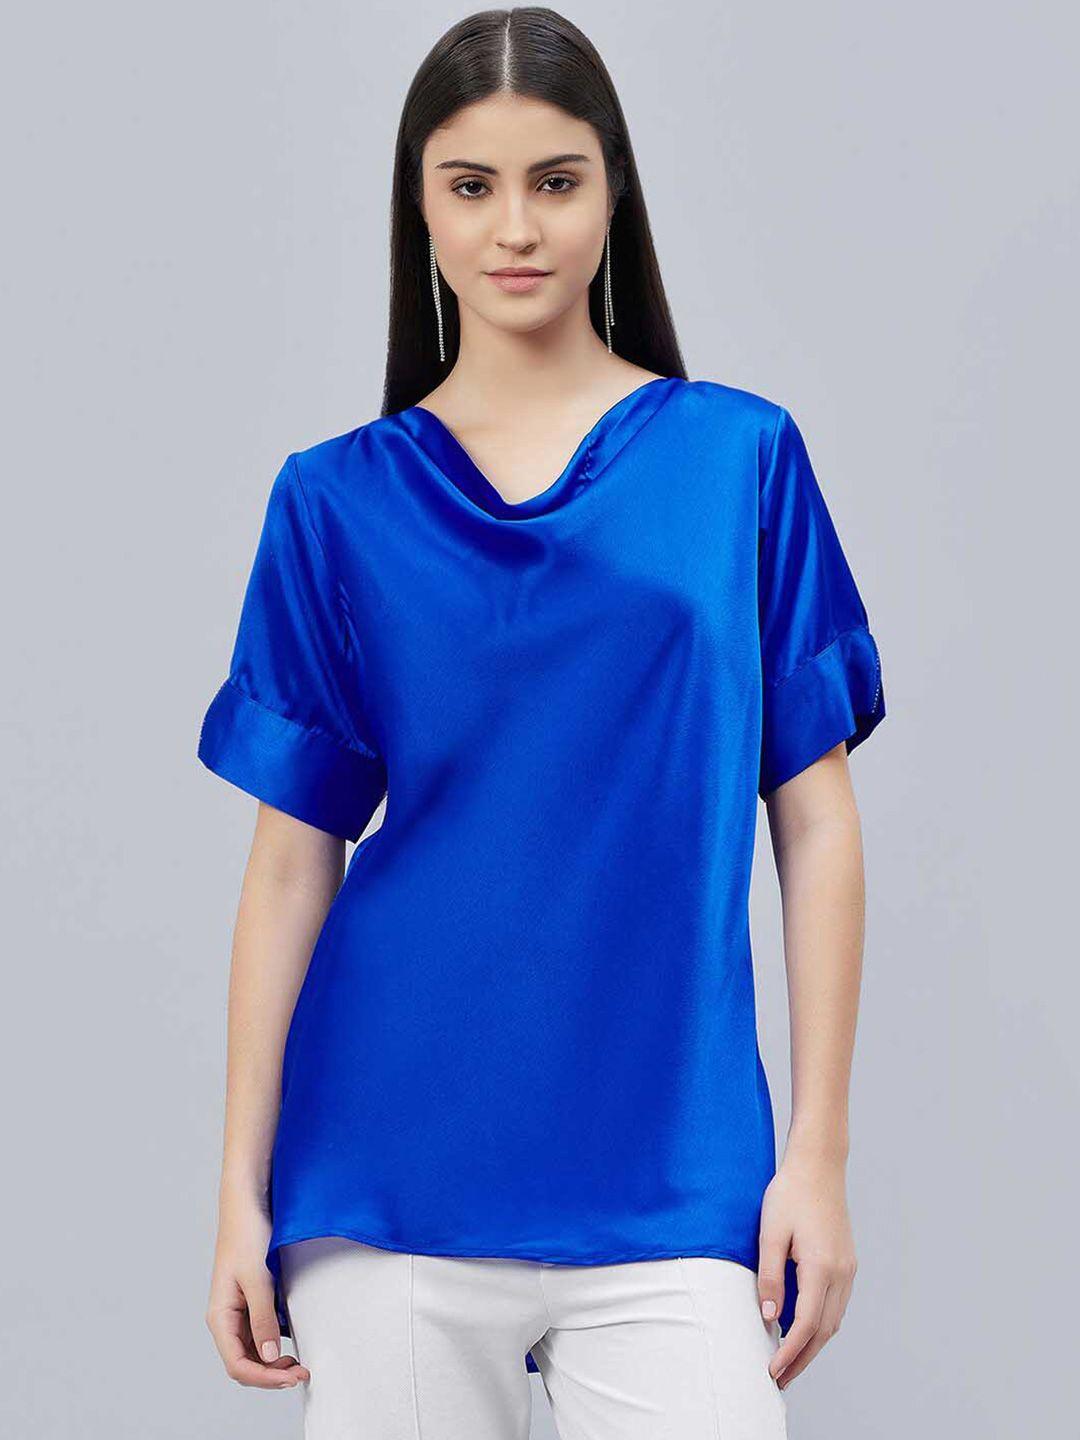 first resort by ramola bachchan cowl neck satin top